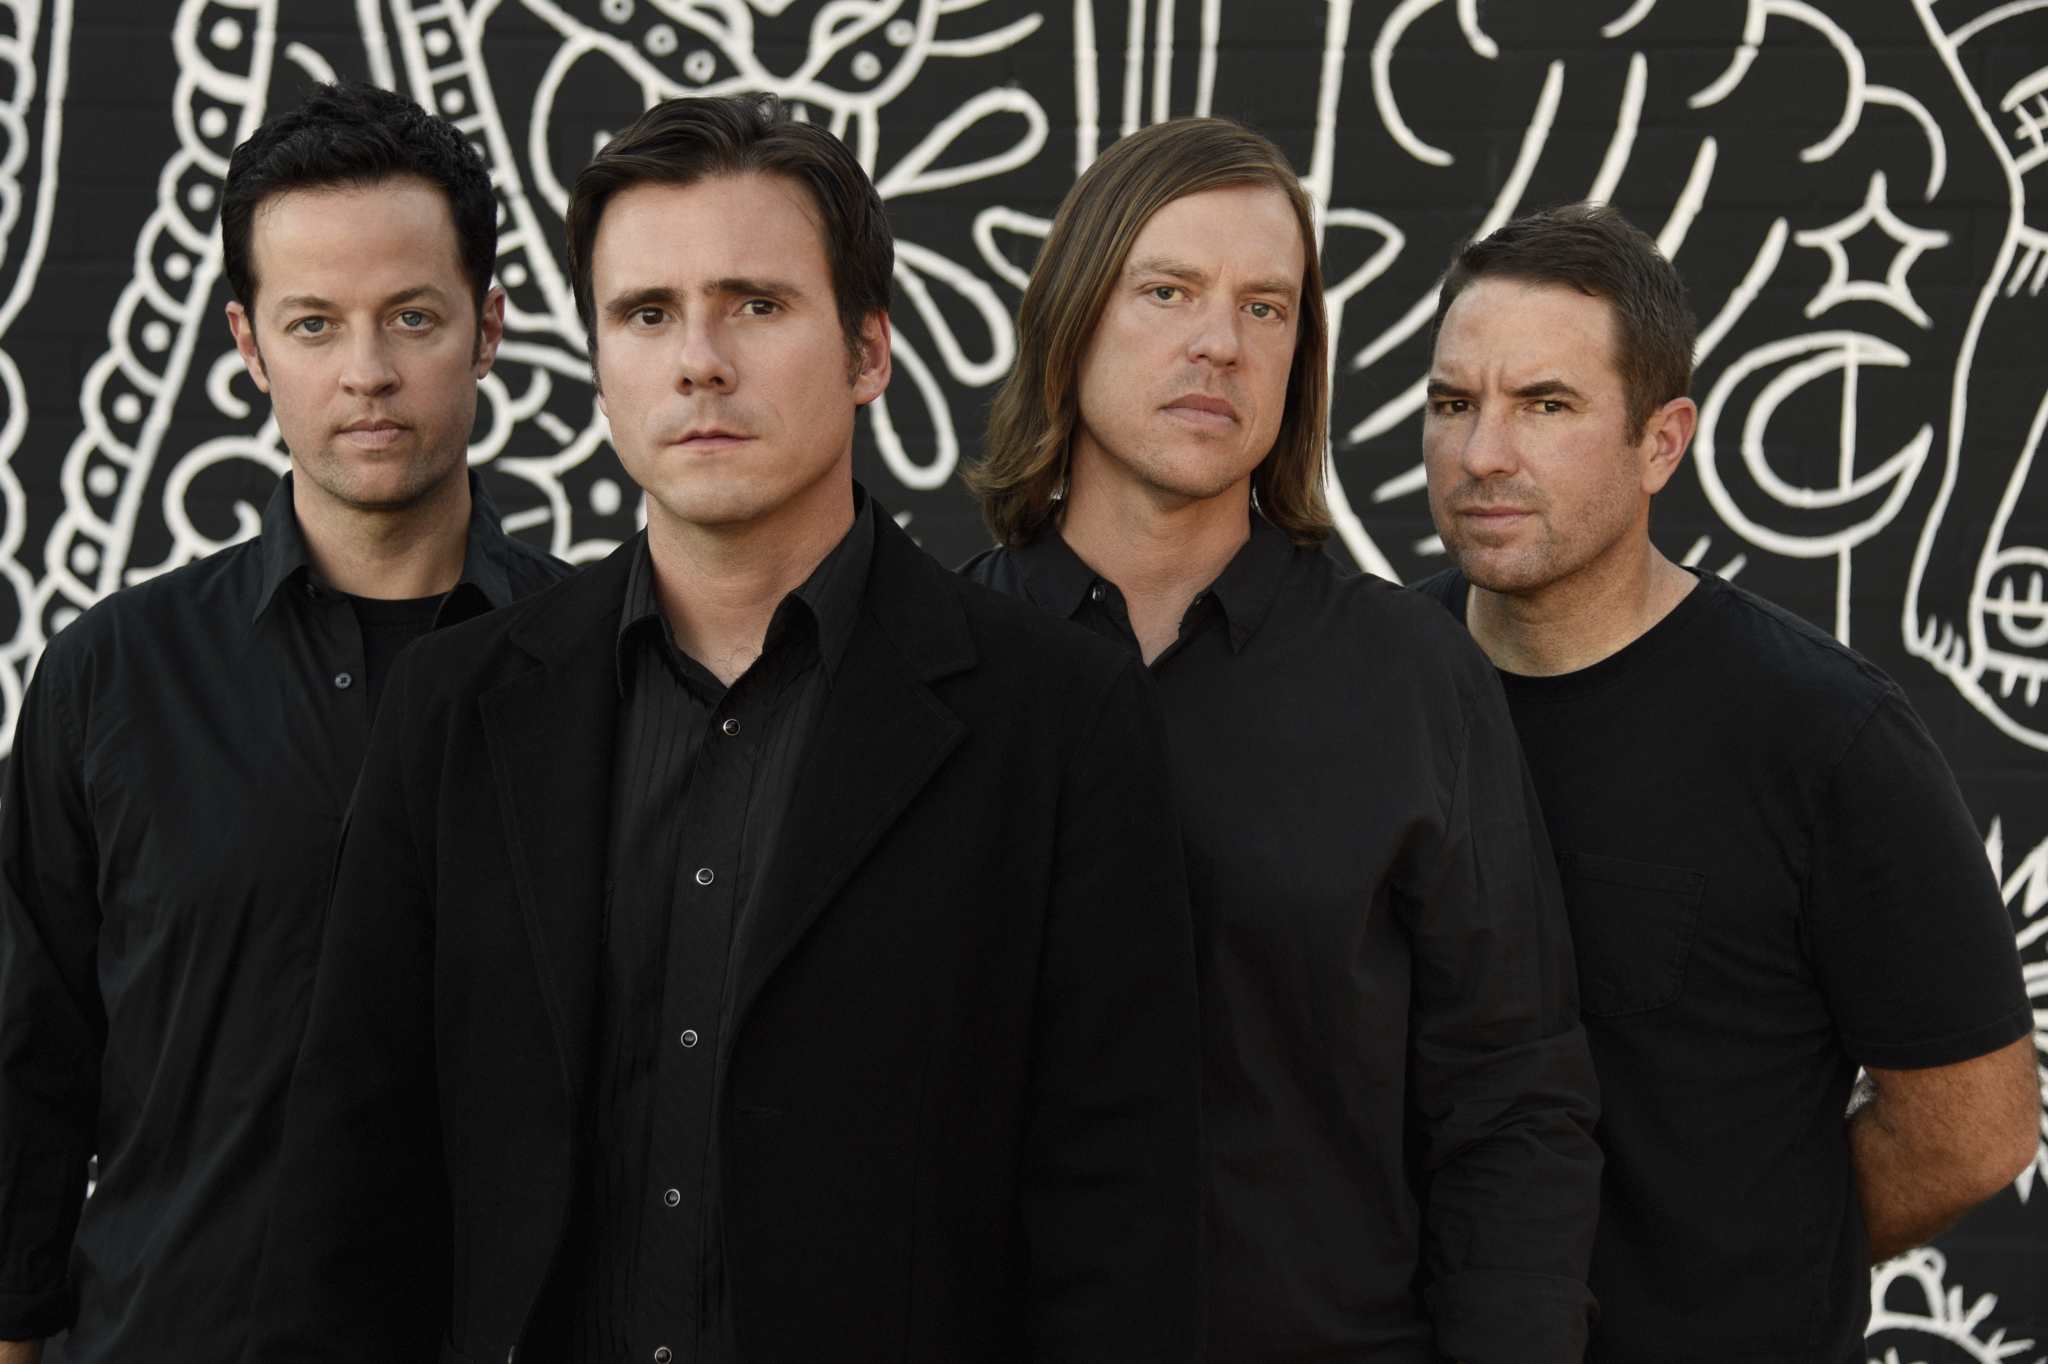 Jimmy Eat World were the first headline act to be announced for this year's Slam Dunk Festival 